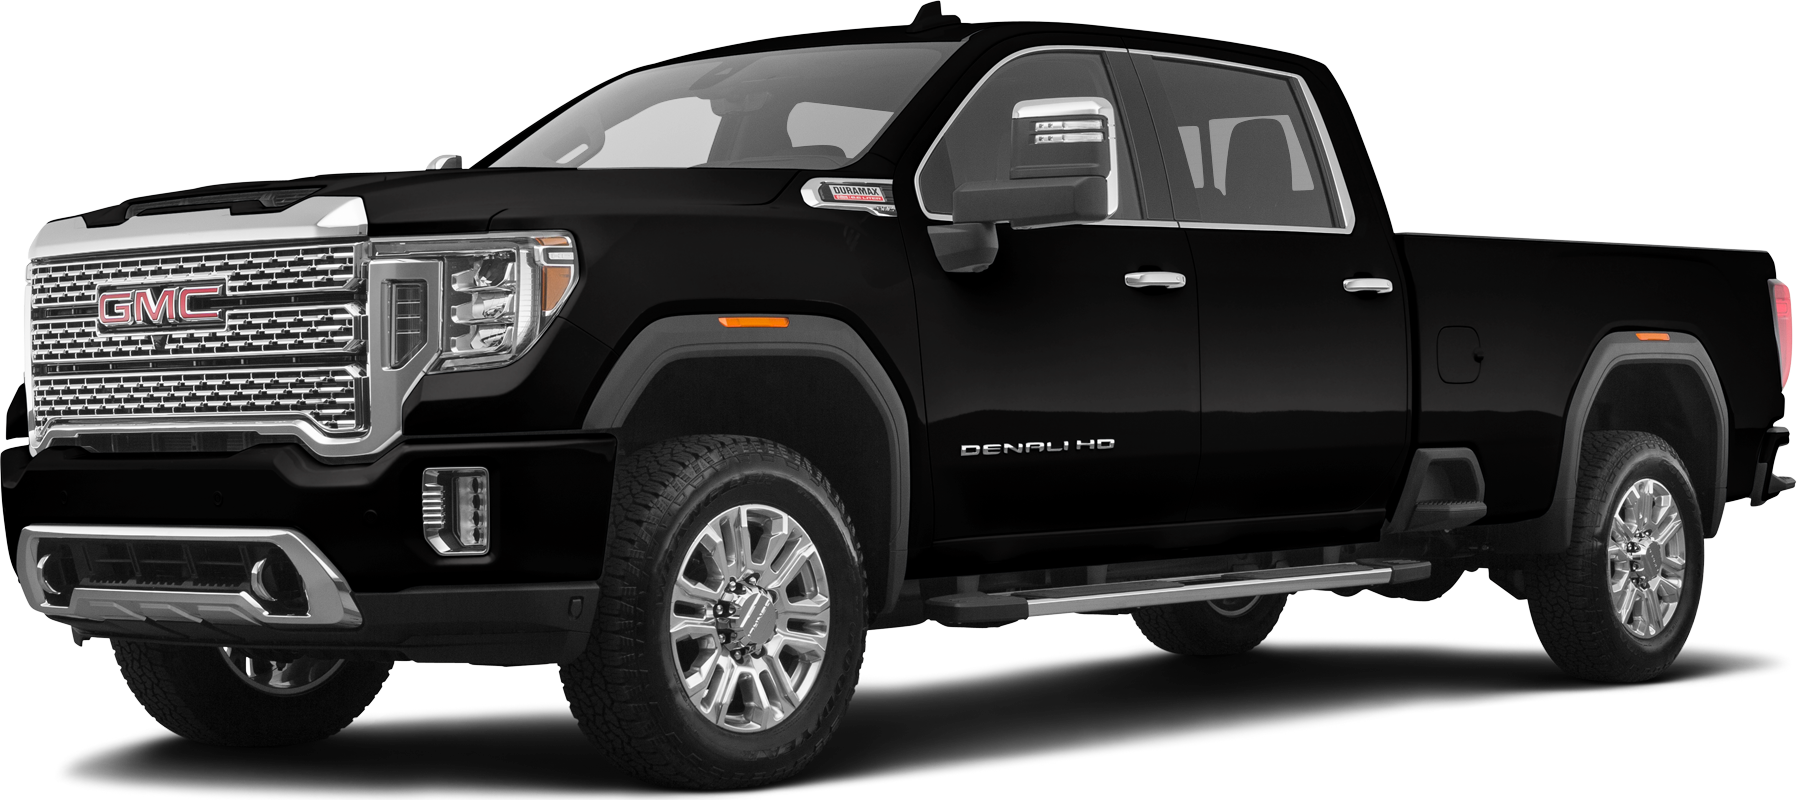 New 2021 Gmc Sierra 3500 Hd Crew Cab Reviews Pricing And Specs Kelley